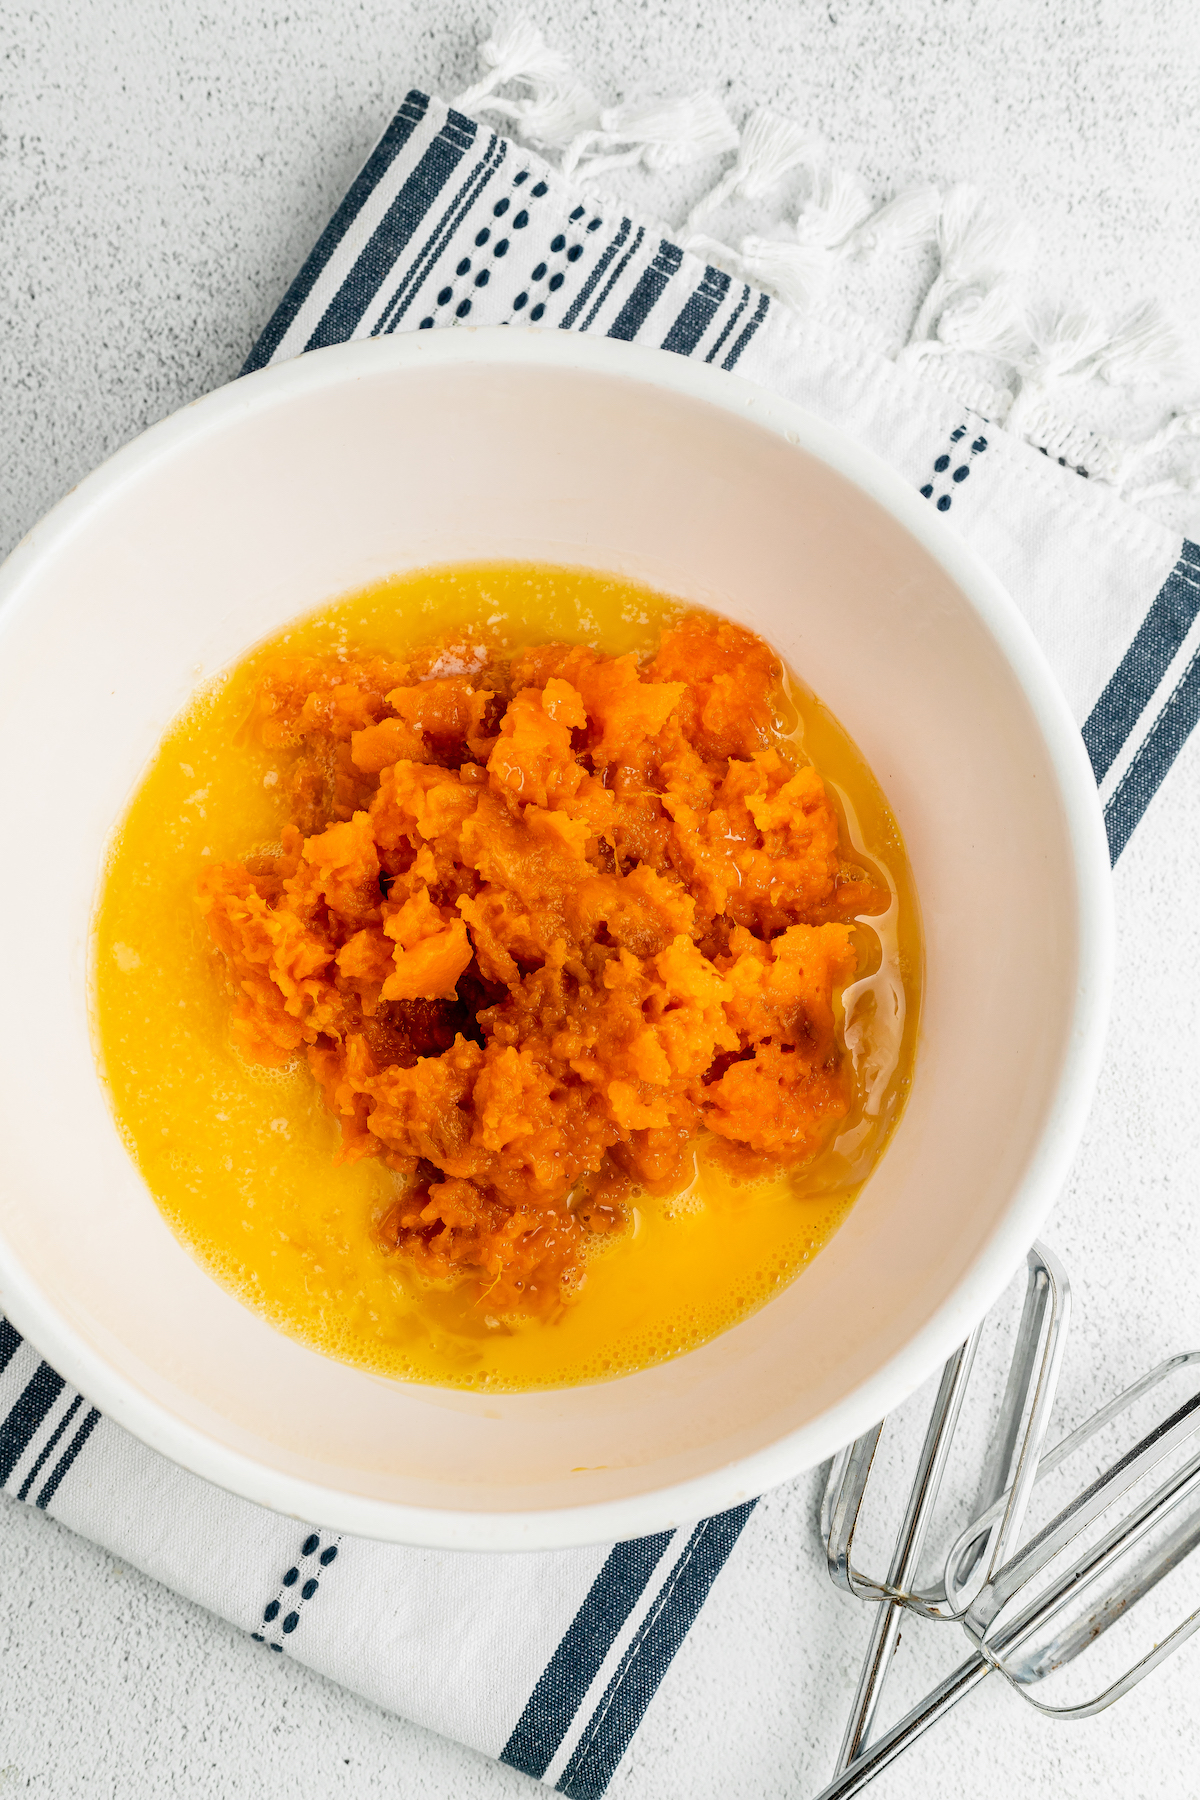 Sweet potato puree, melted butter, and eggs in a mixing bowl.